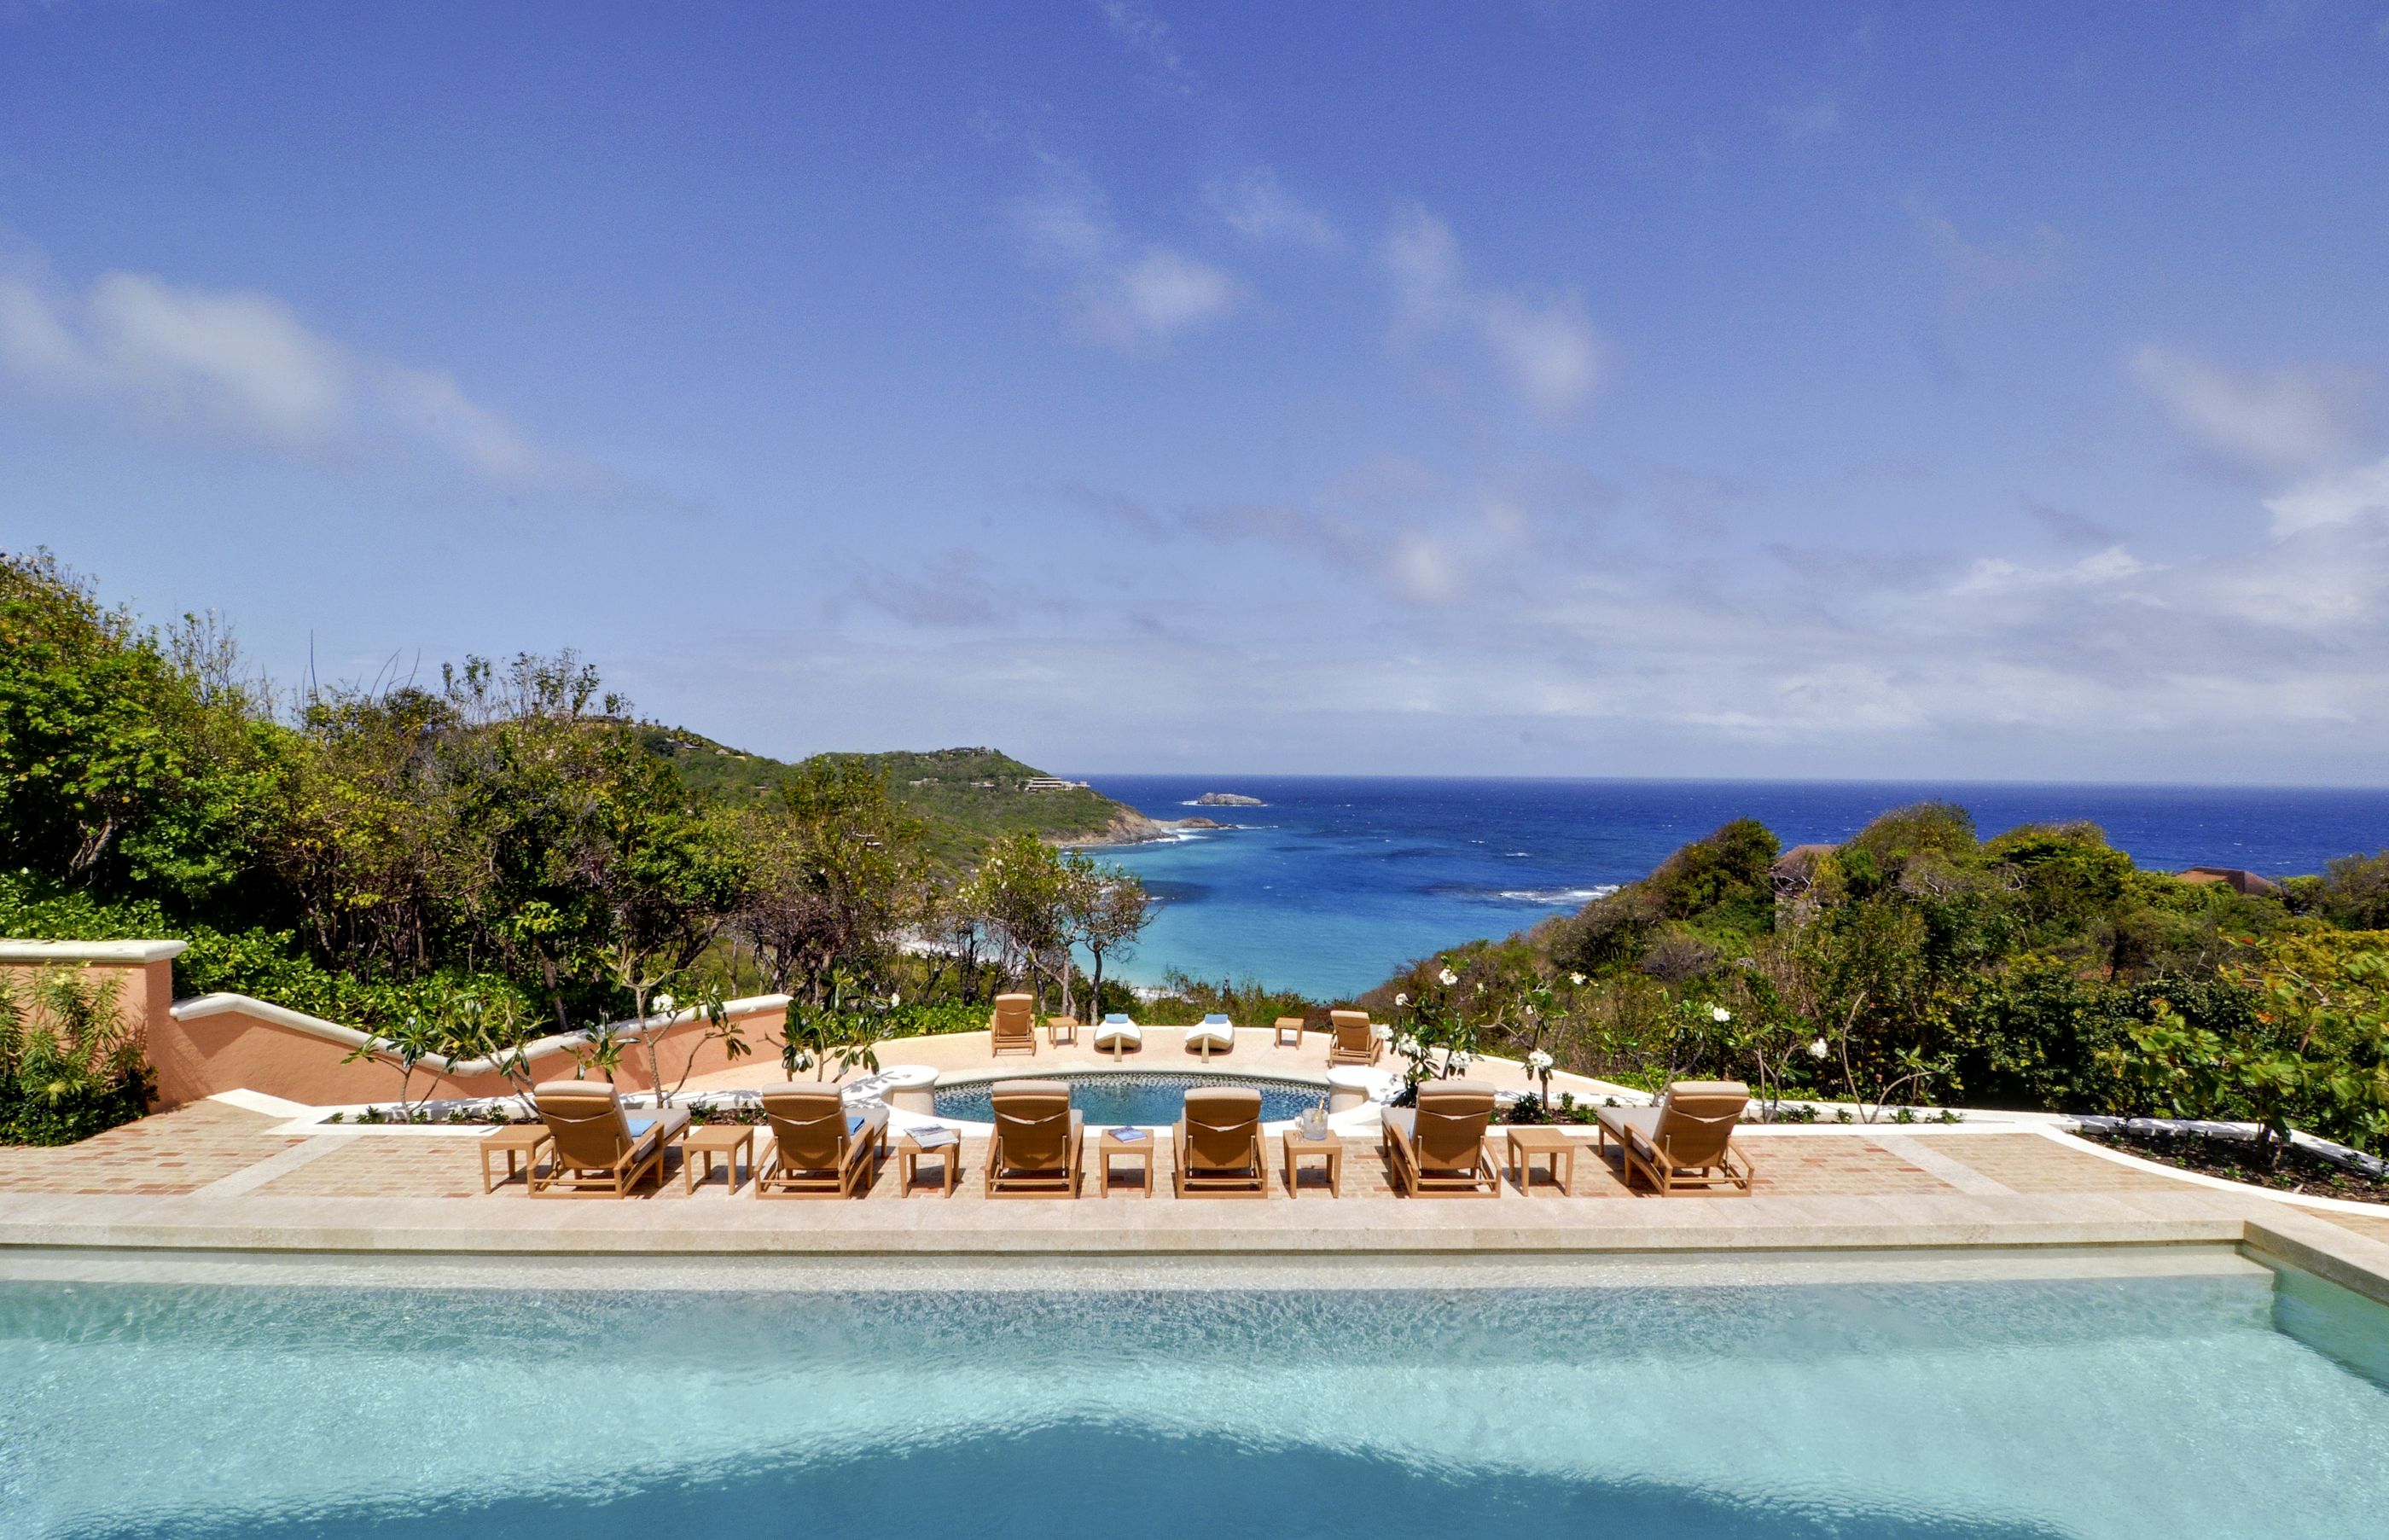 View from the swiimming pool of Sienna, Mustique